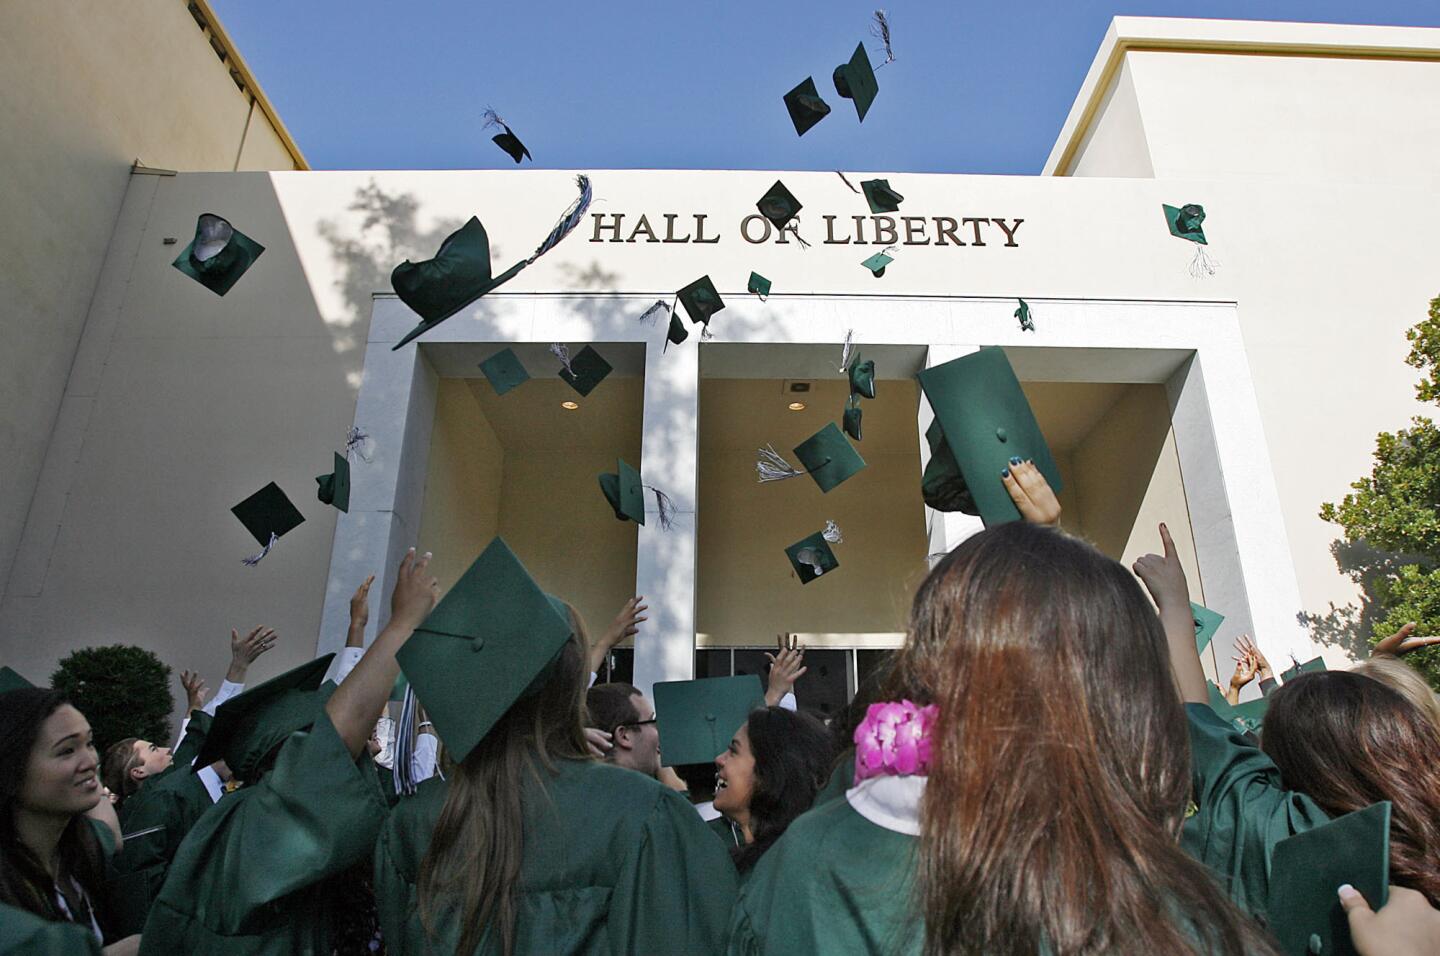 Grads celebrate after the Providence High School graduation at Forest Lawn Hollywood Hills' Hall of Liberty in Los Angeles on Saturday, June 9, 2012.